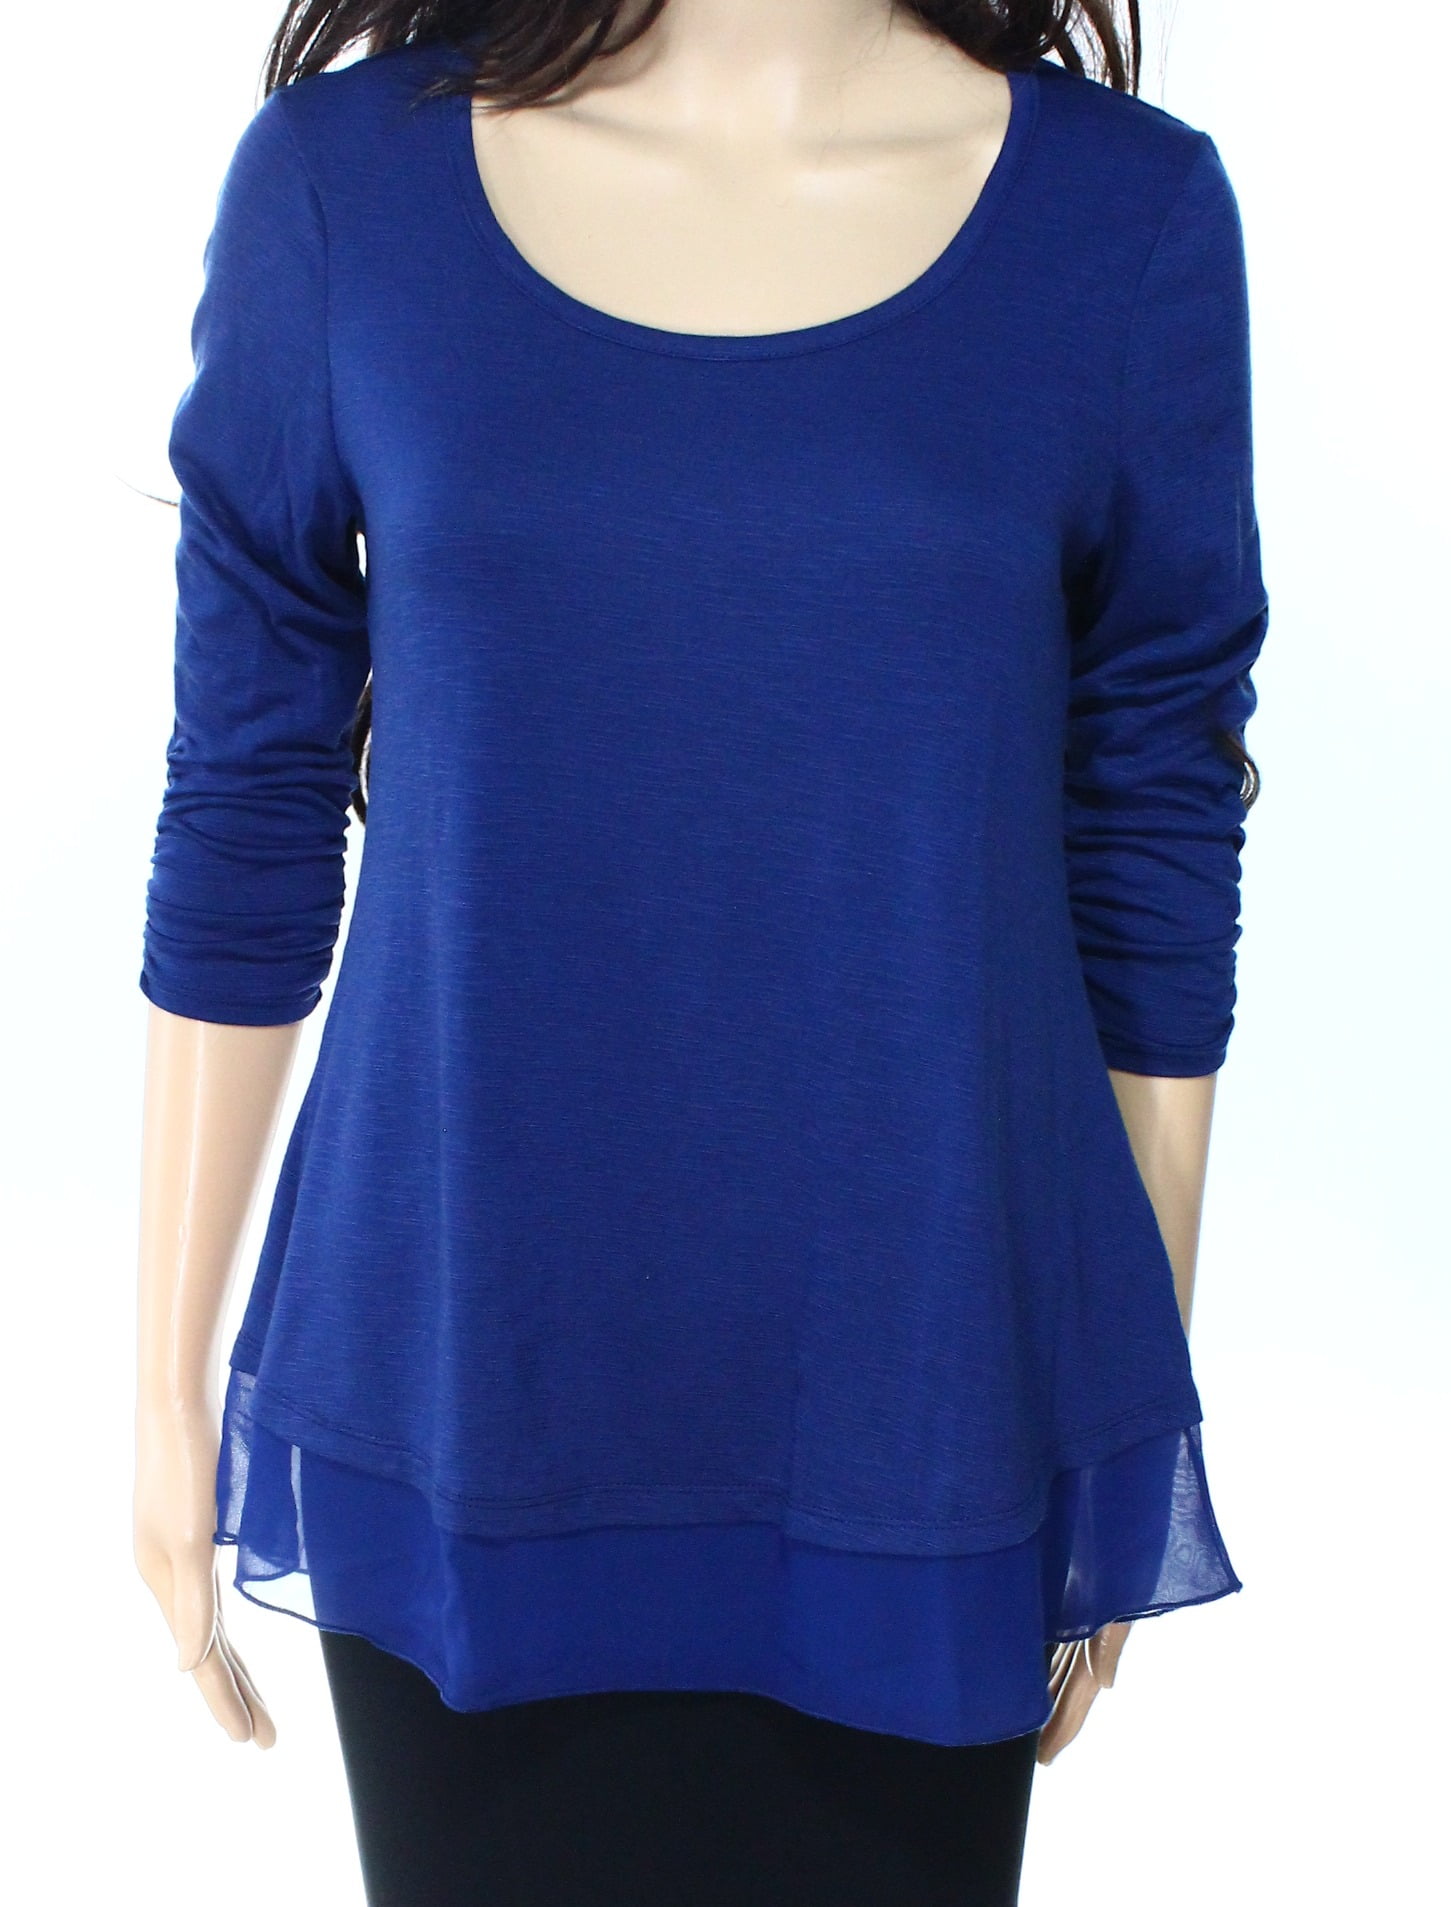 Style & Co. - Style & Co. NEW Mountain Blue Womens Size Medium M Scoop ...